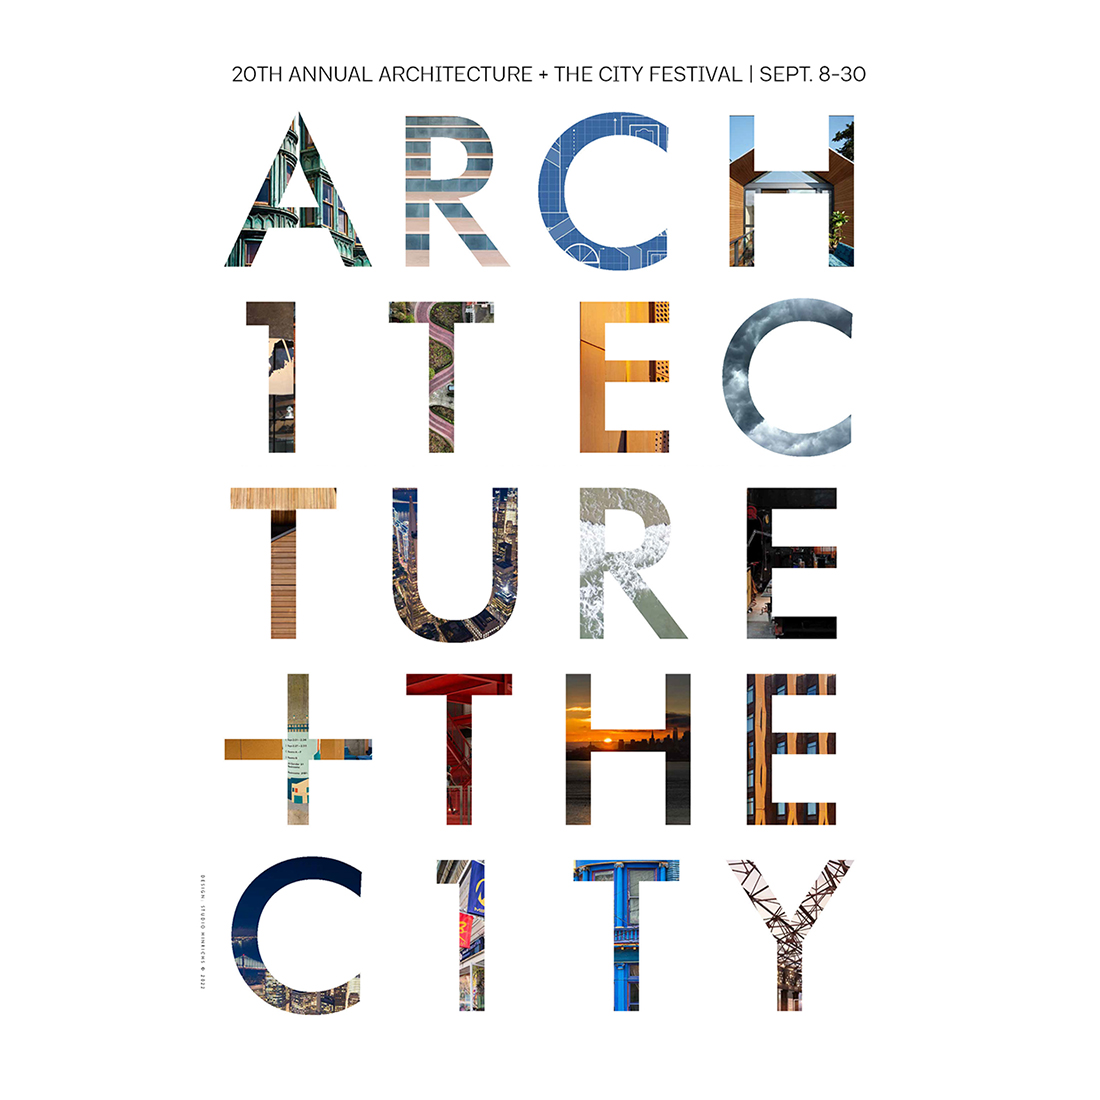 Architecture + the City Festival Group of People